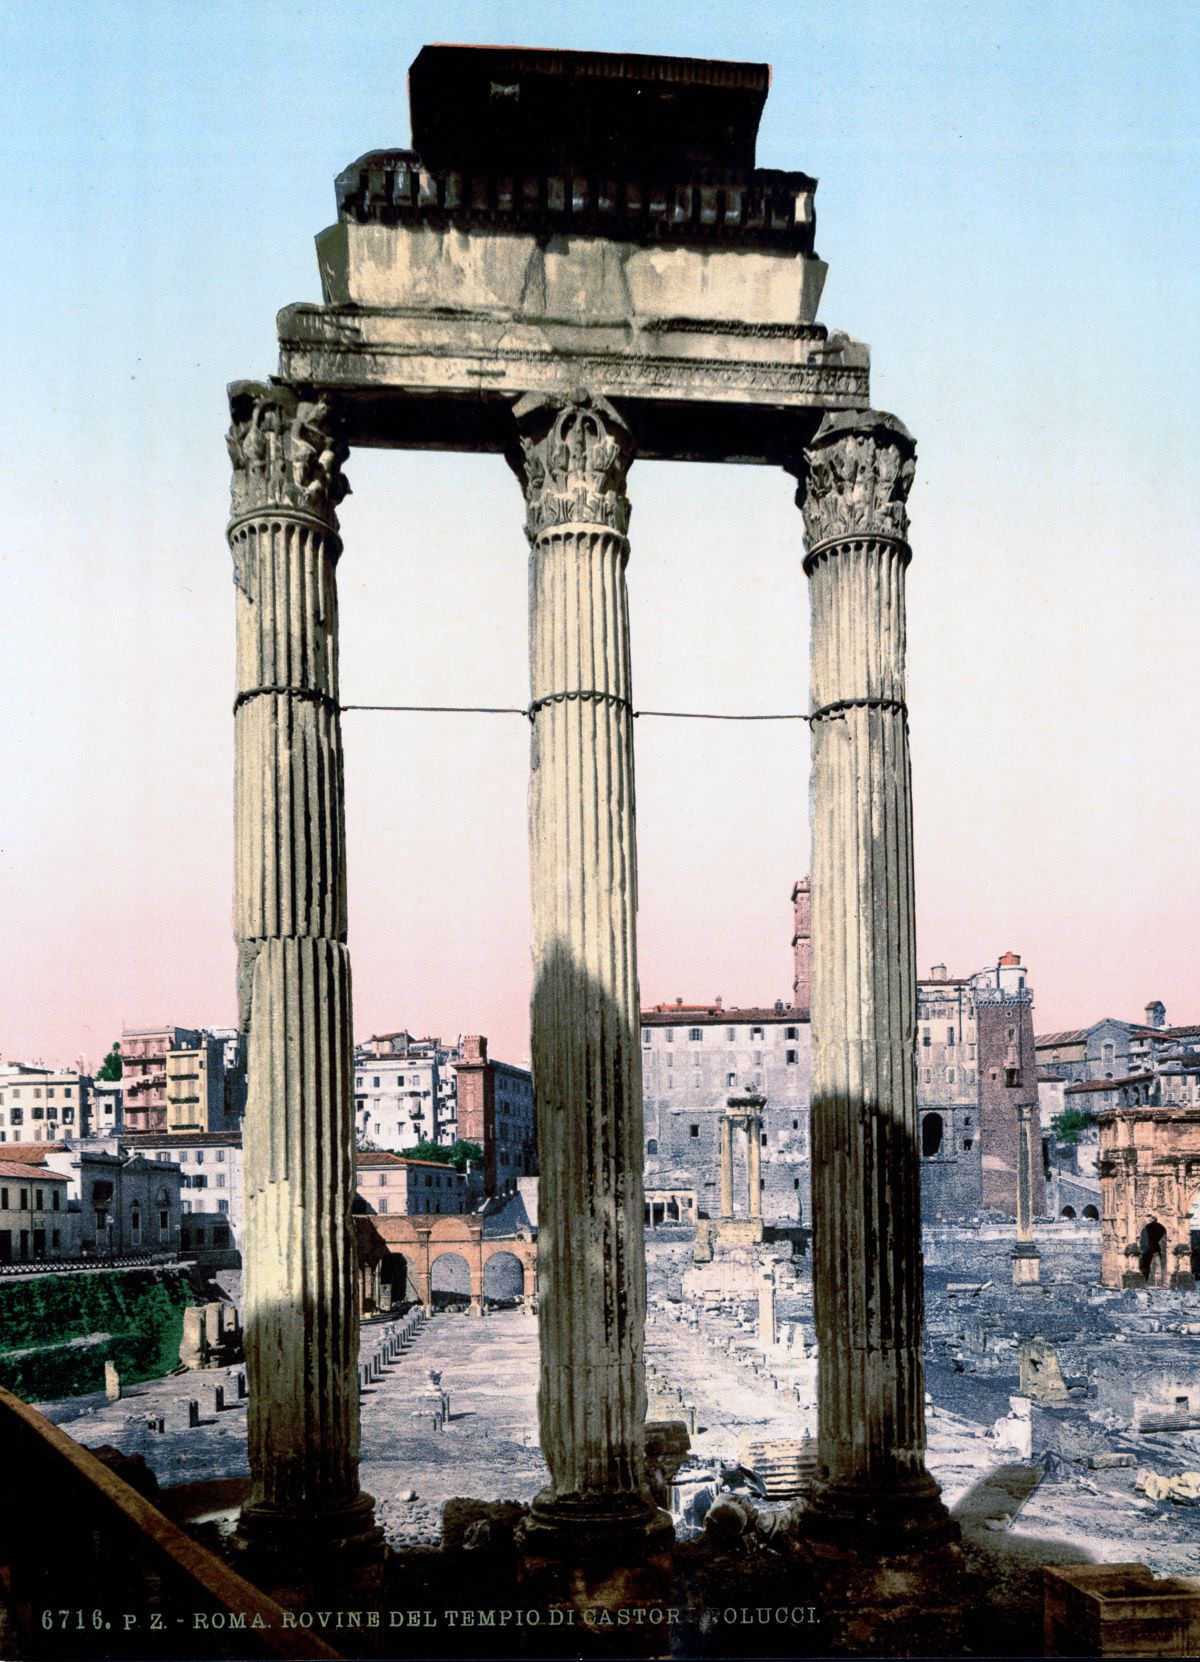 The ruins of the Temple of Castor and Pollux.